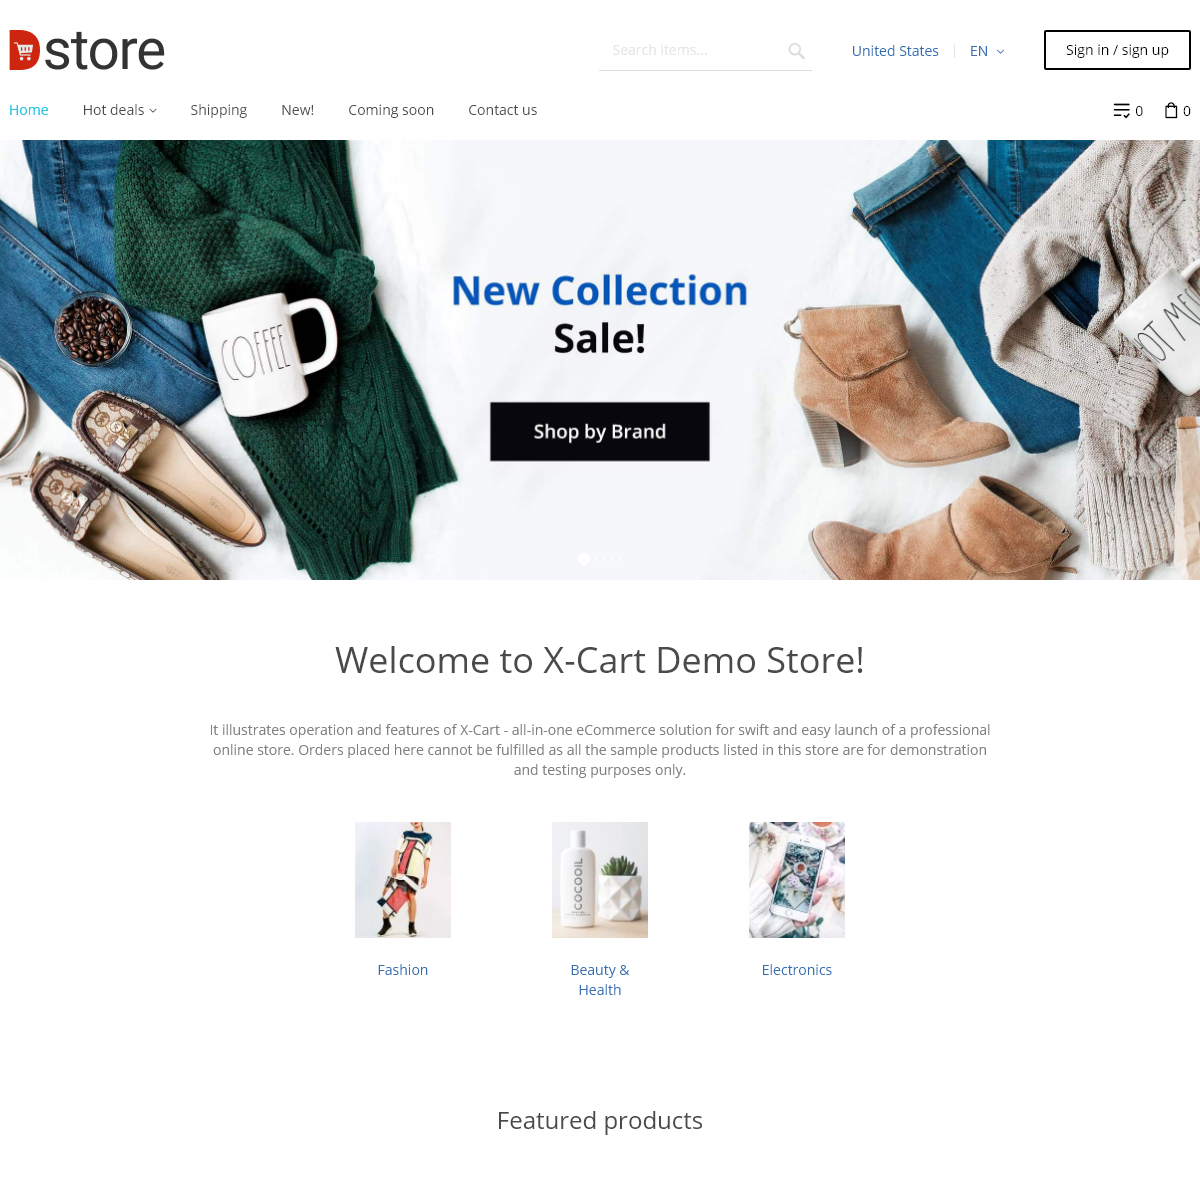 A complete backup of dstore.com